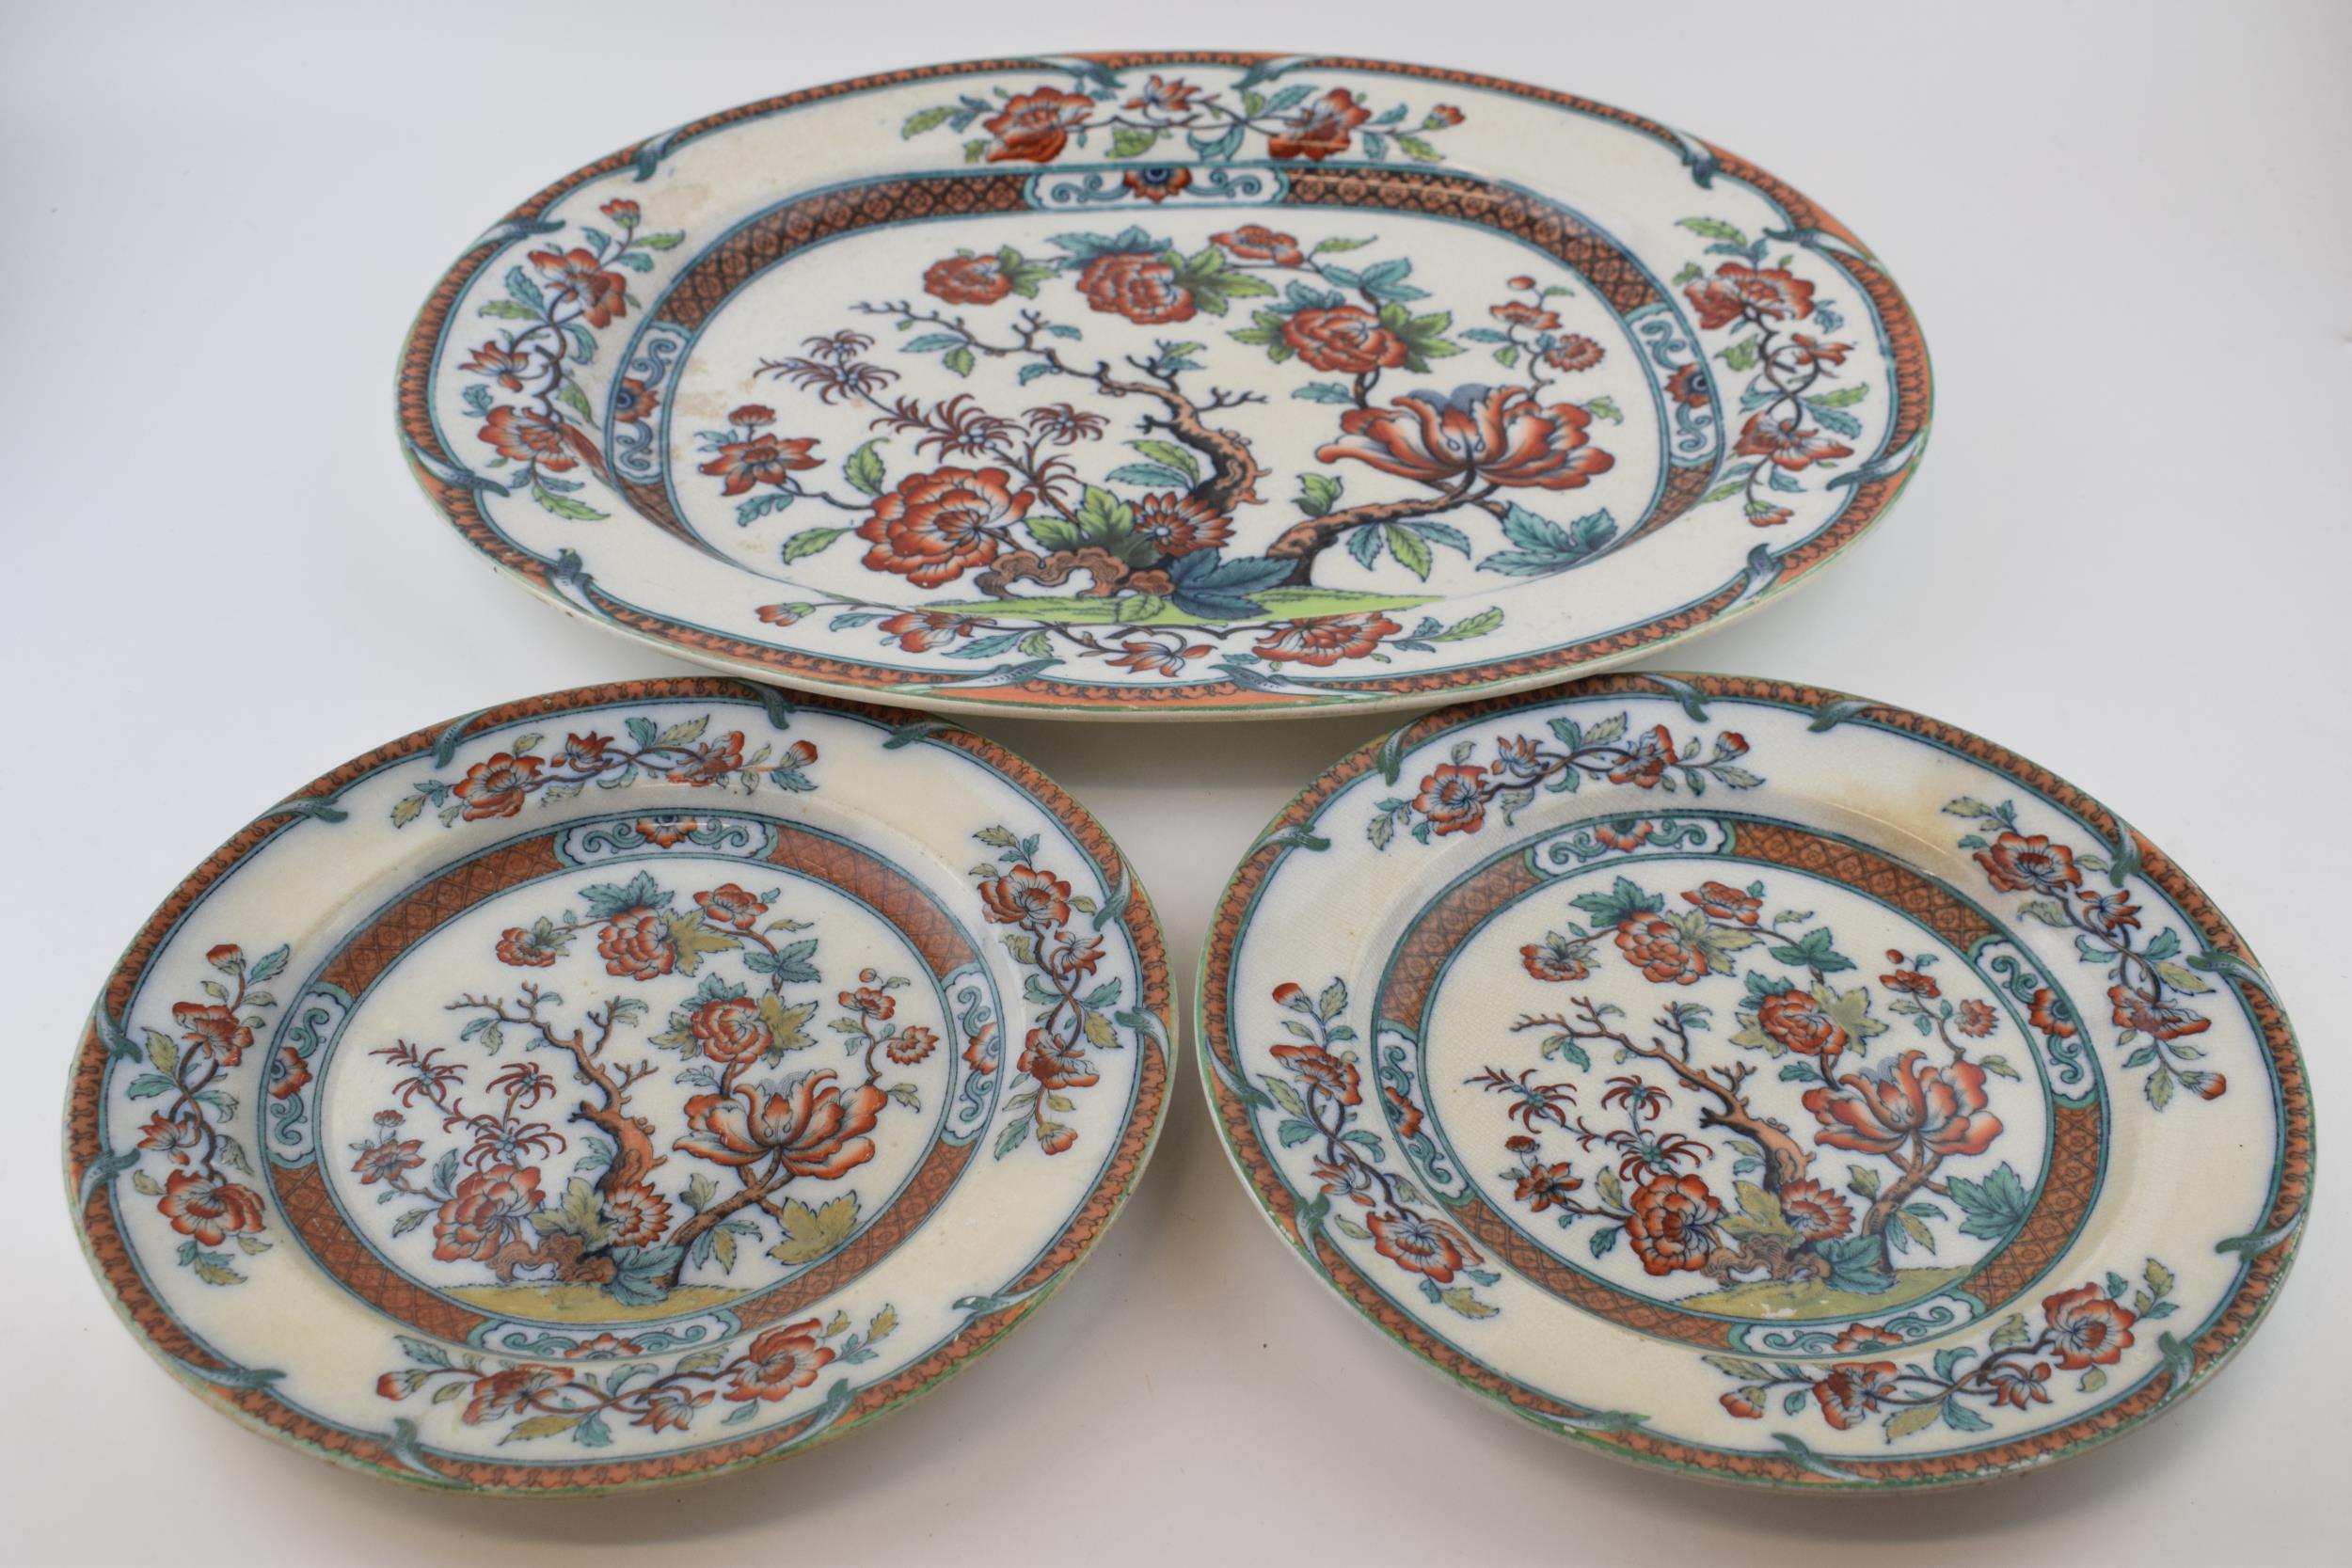 An early 19 th century transfer-printed and coloured iron stone china large floral design platter,